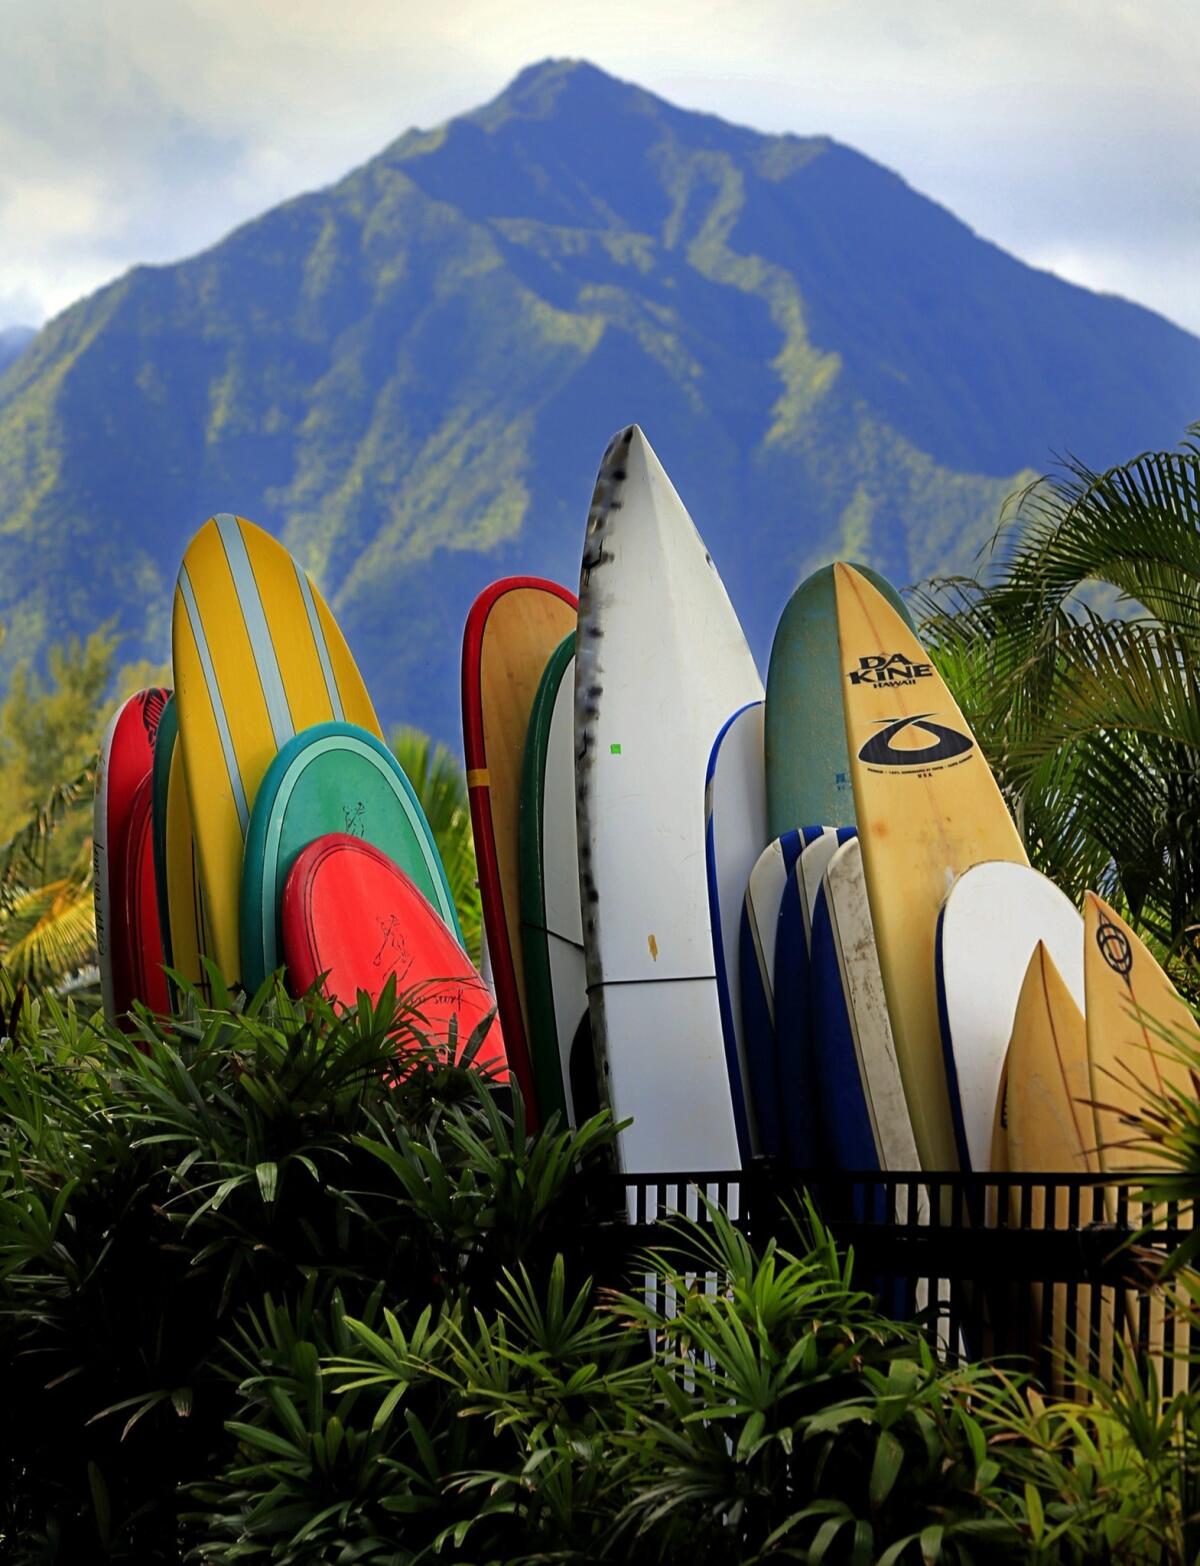 Surfboards and paddle boards for guests are stacked together at the St. Regis Princeville resort.